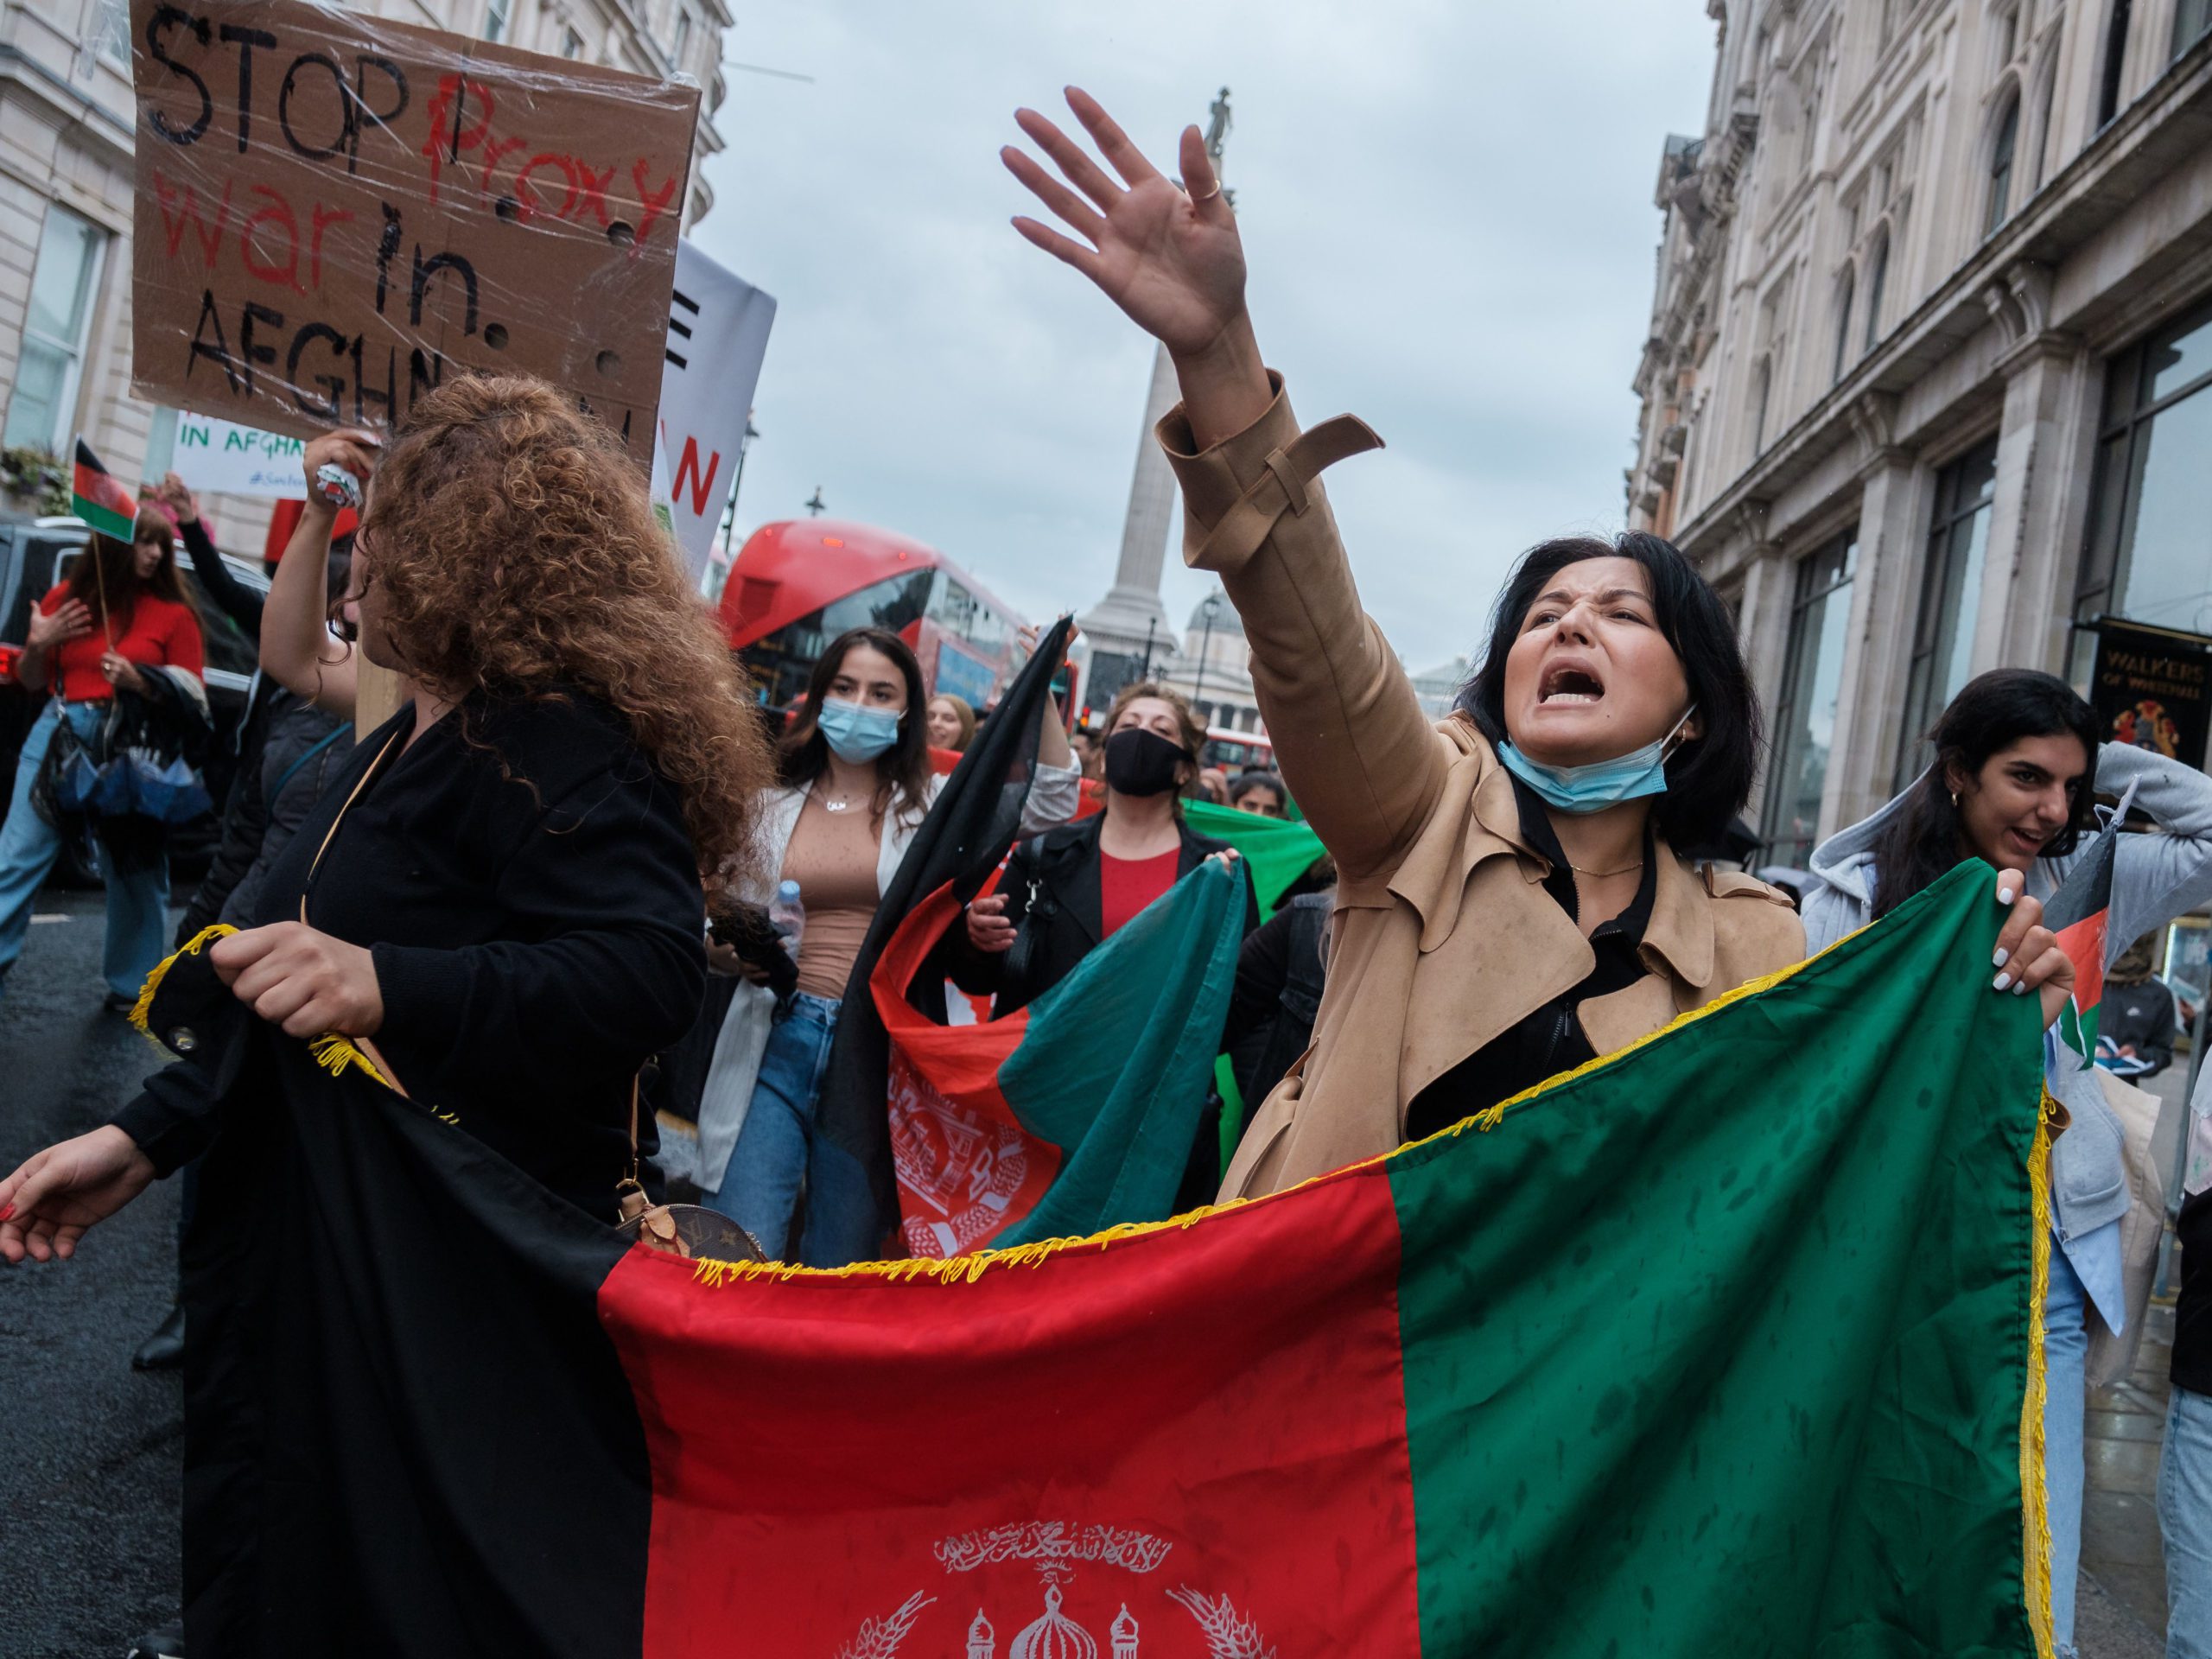 Women in England protest the violence of the Taliban takeover of Afghanistan in August 2021